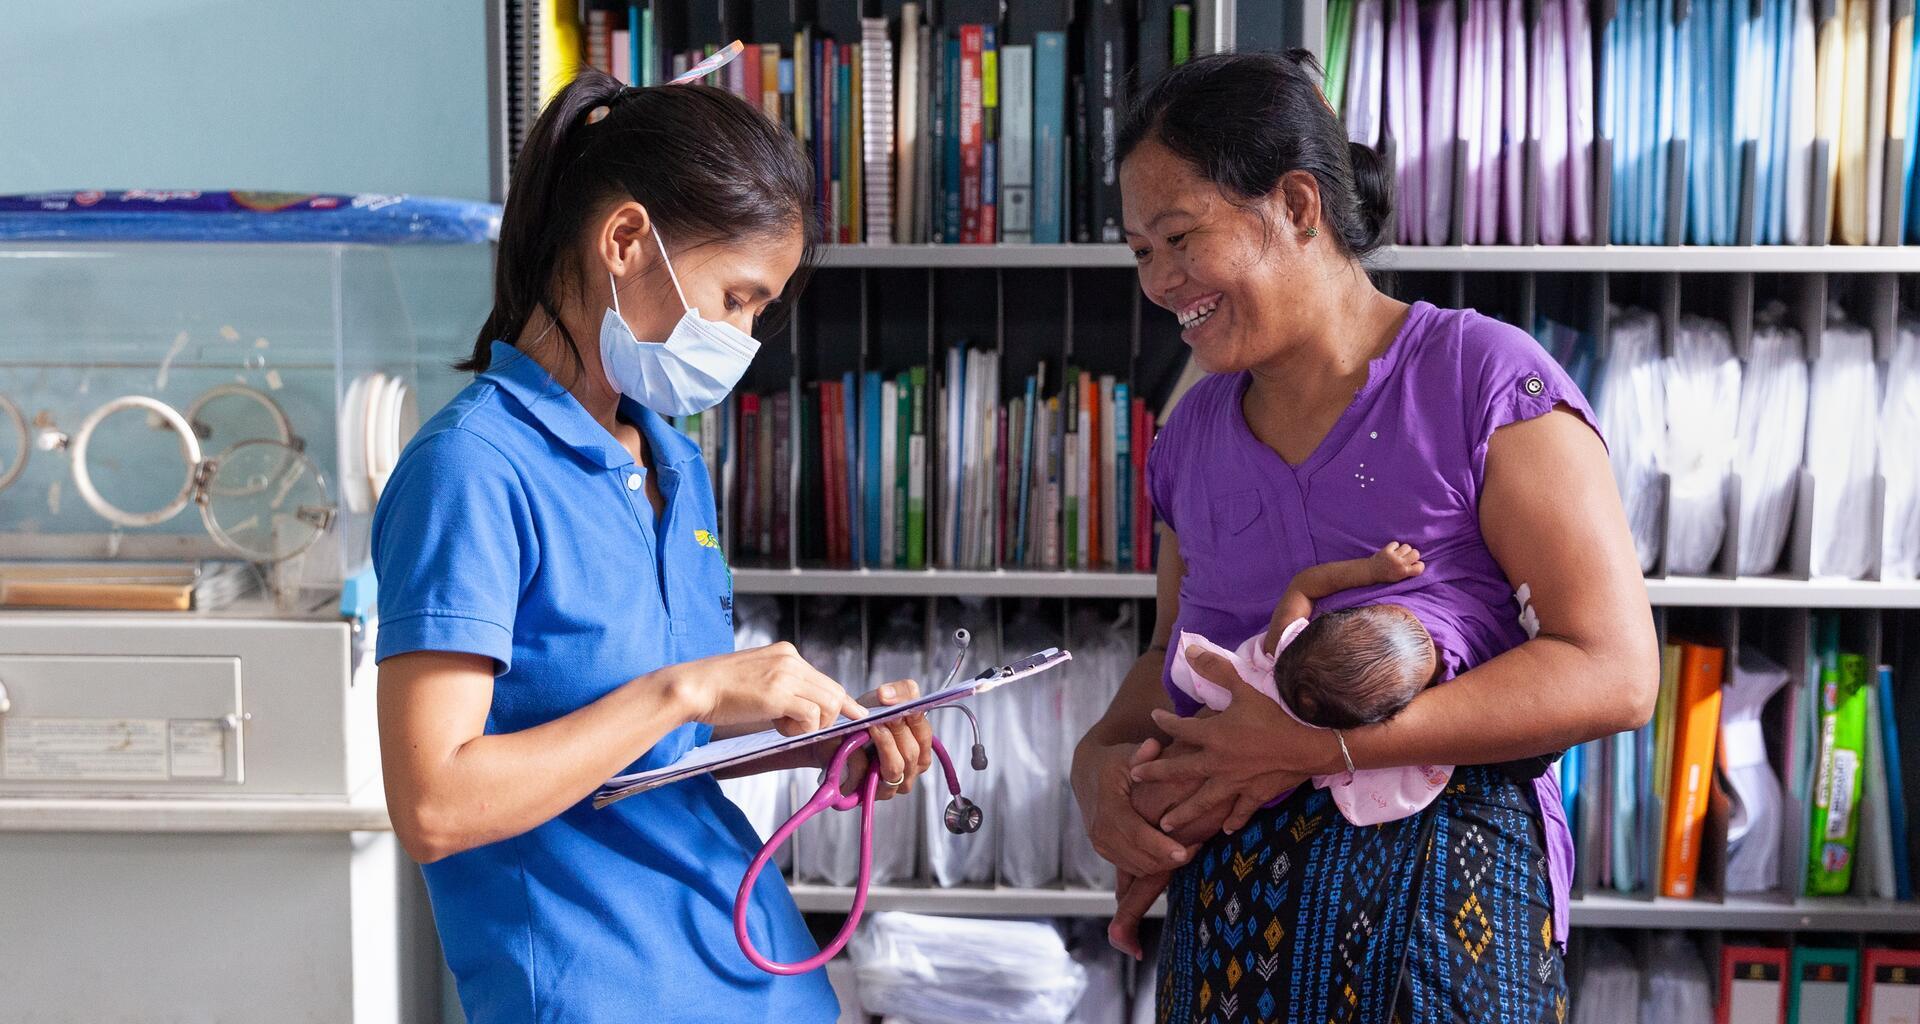 A woman breastfeeds and talks to a medical worker.